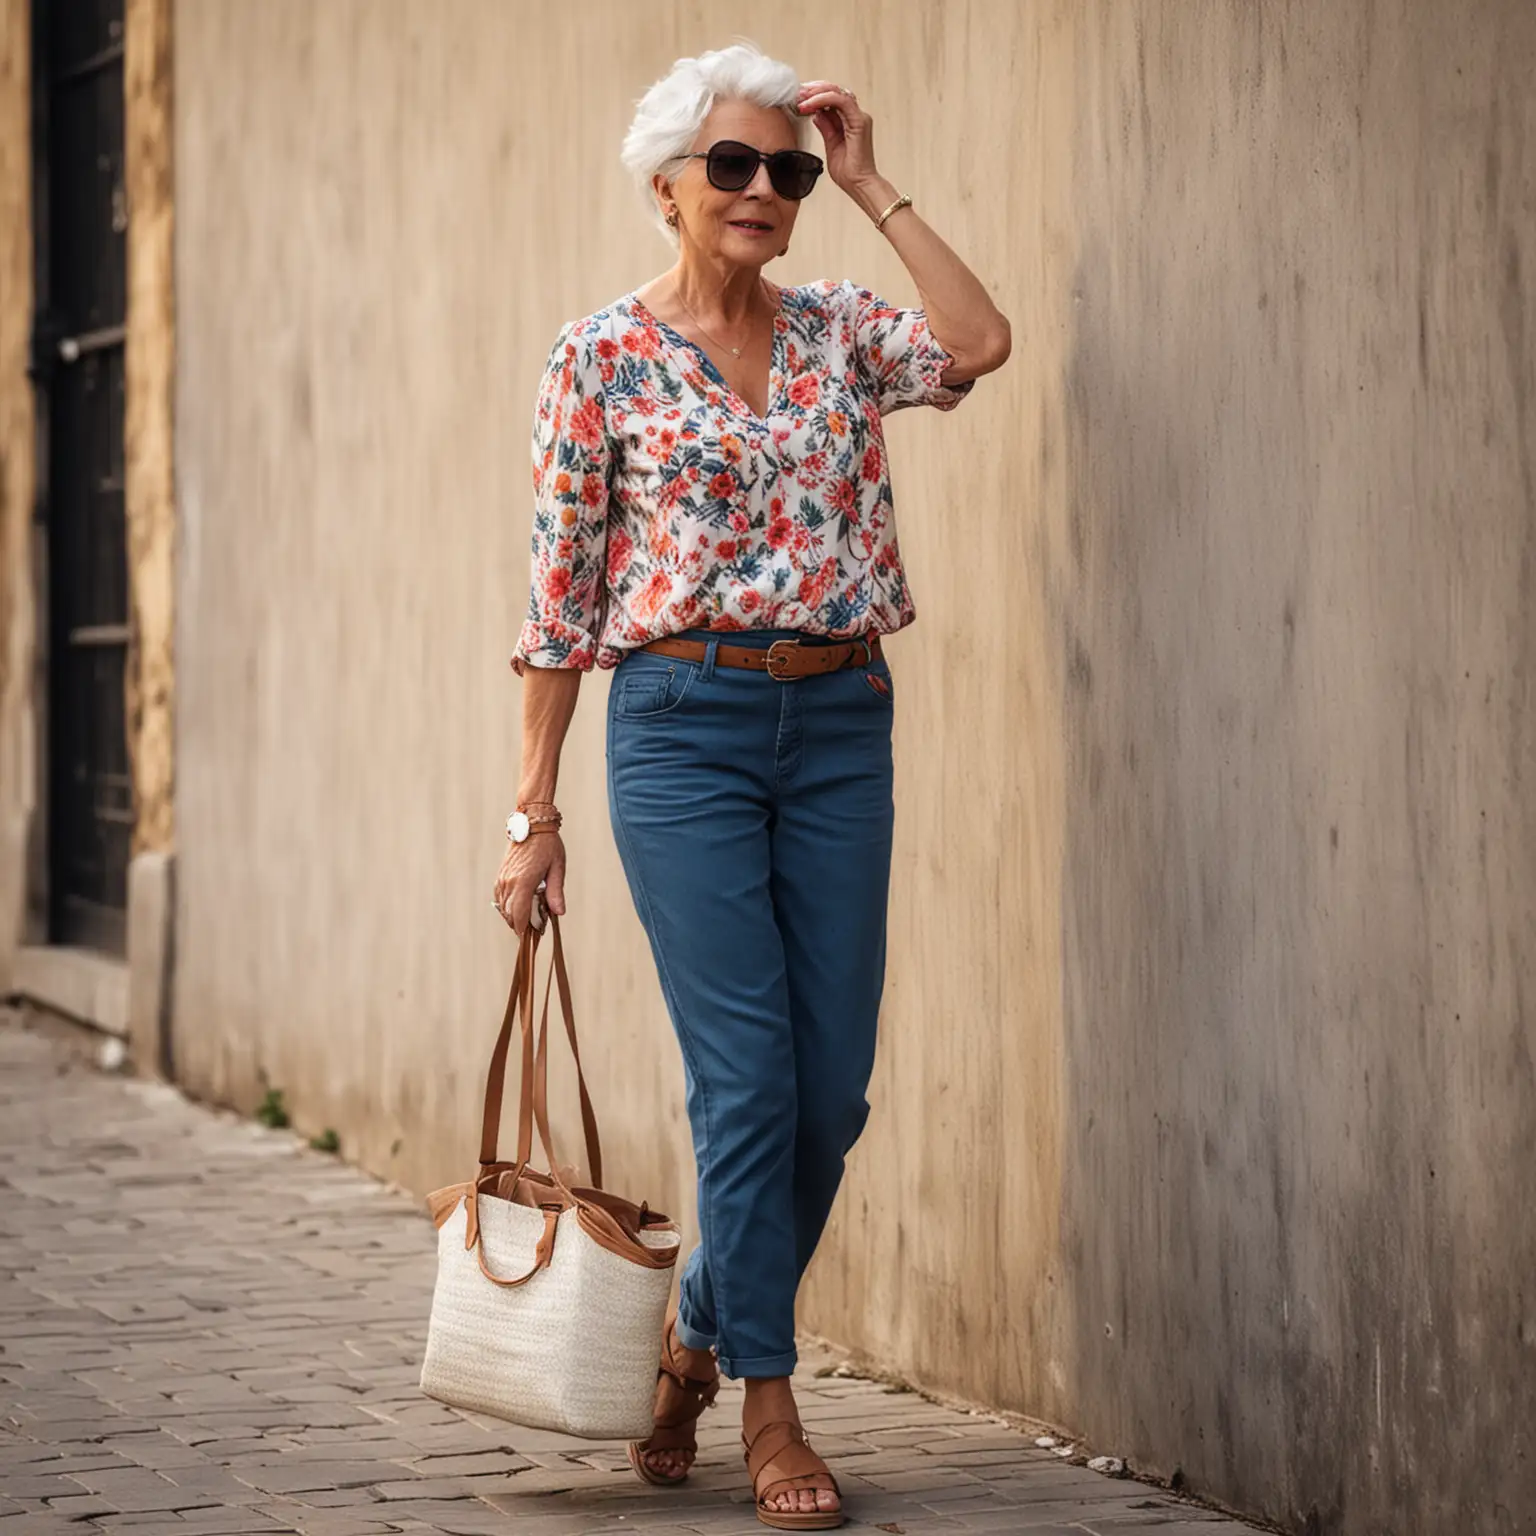 trendy summer outfit for women over 50 years of age